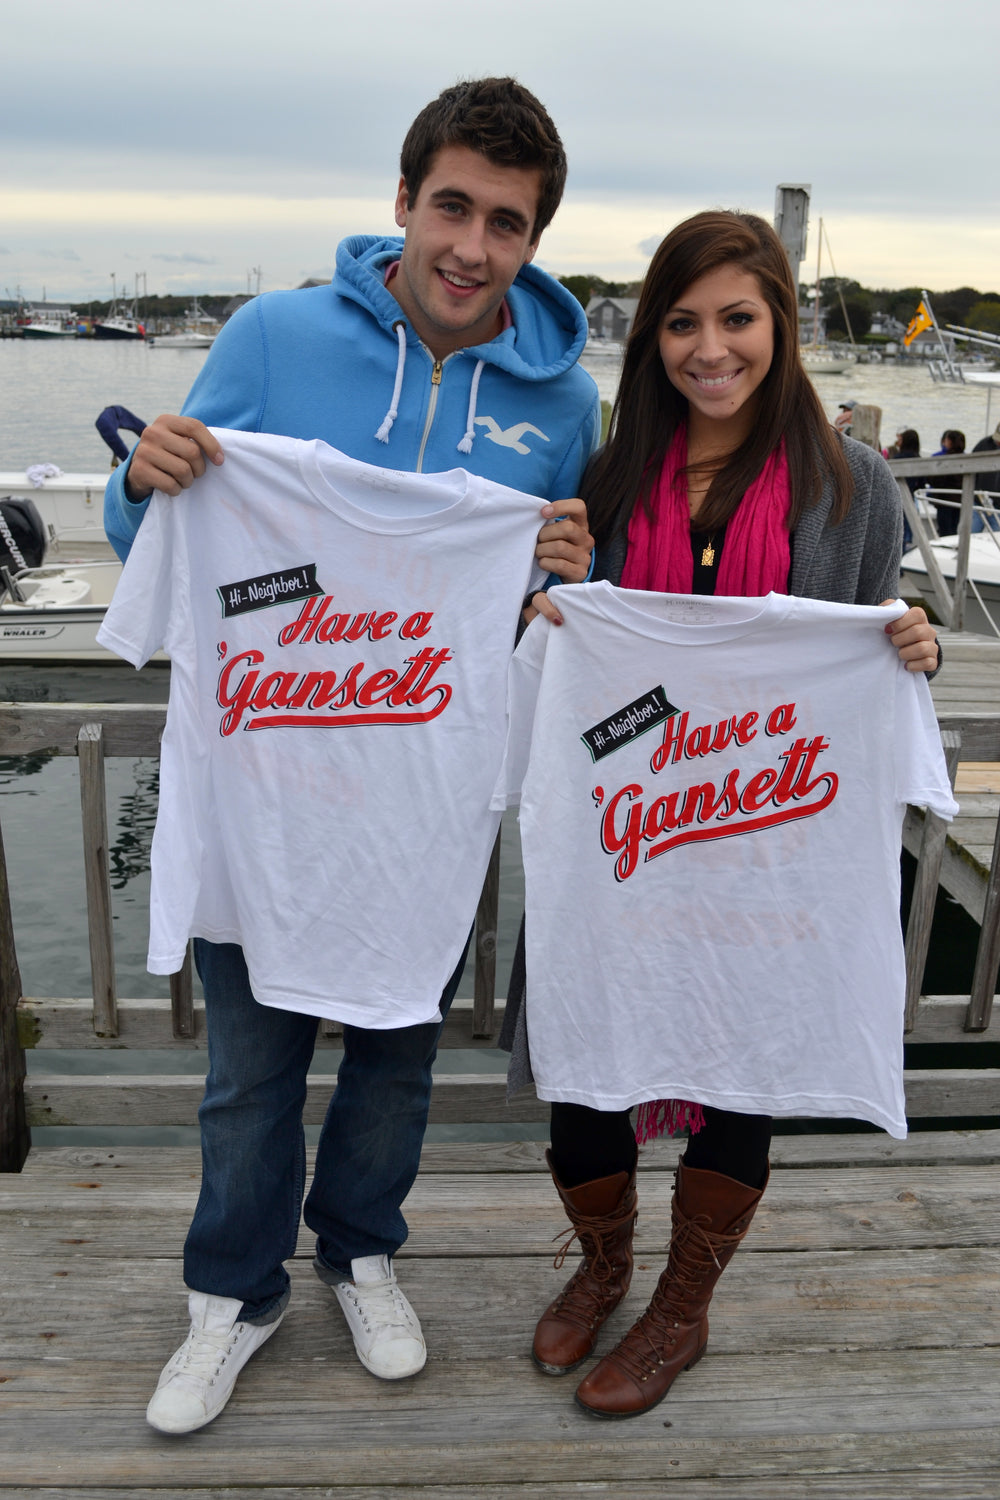 New Gansett Gear For Sale In Our Online Store With Free Shipping Until 11/30